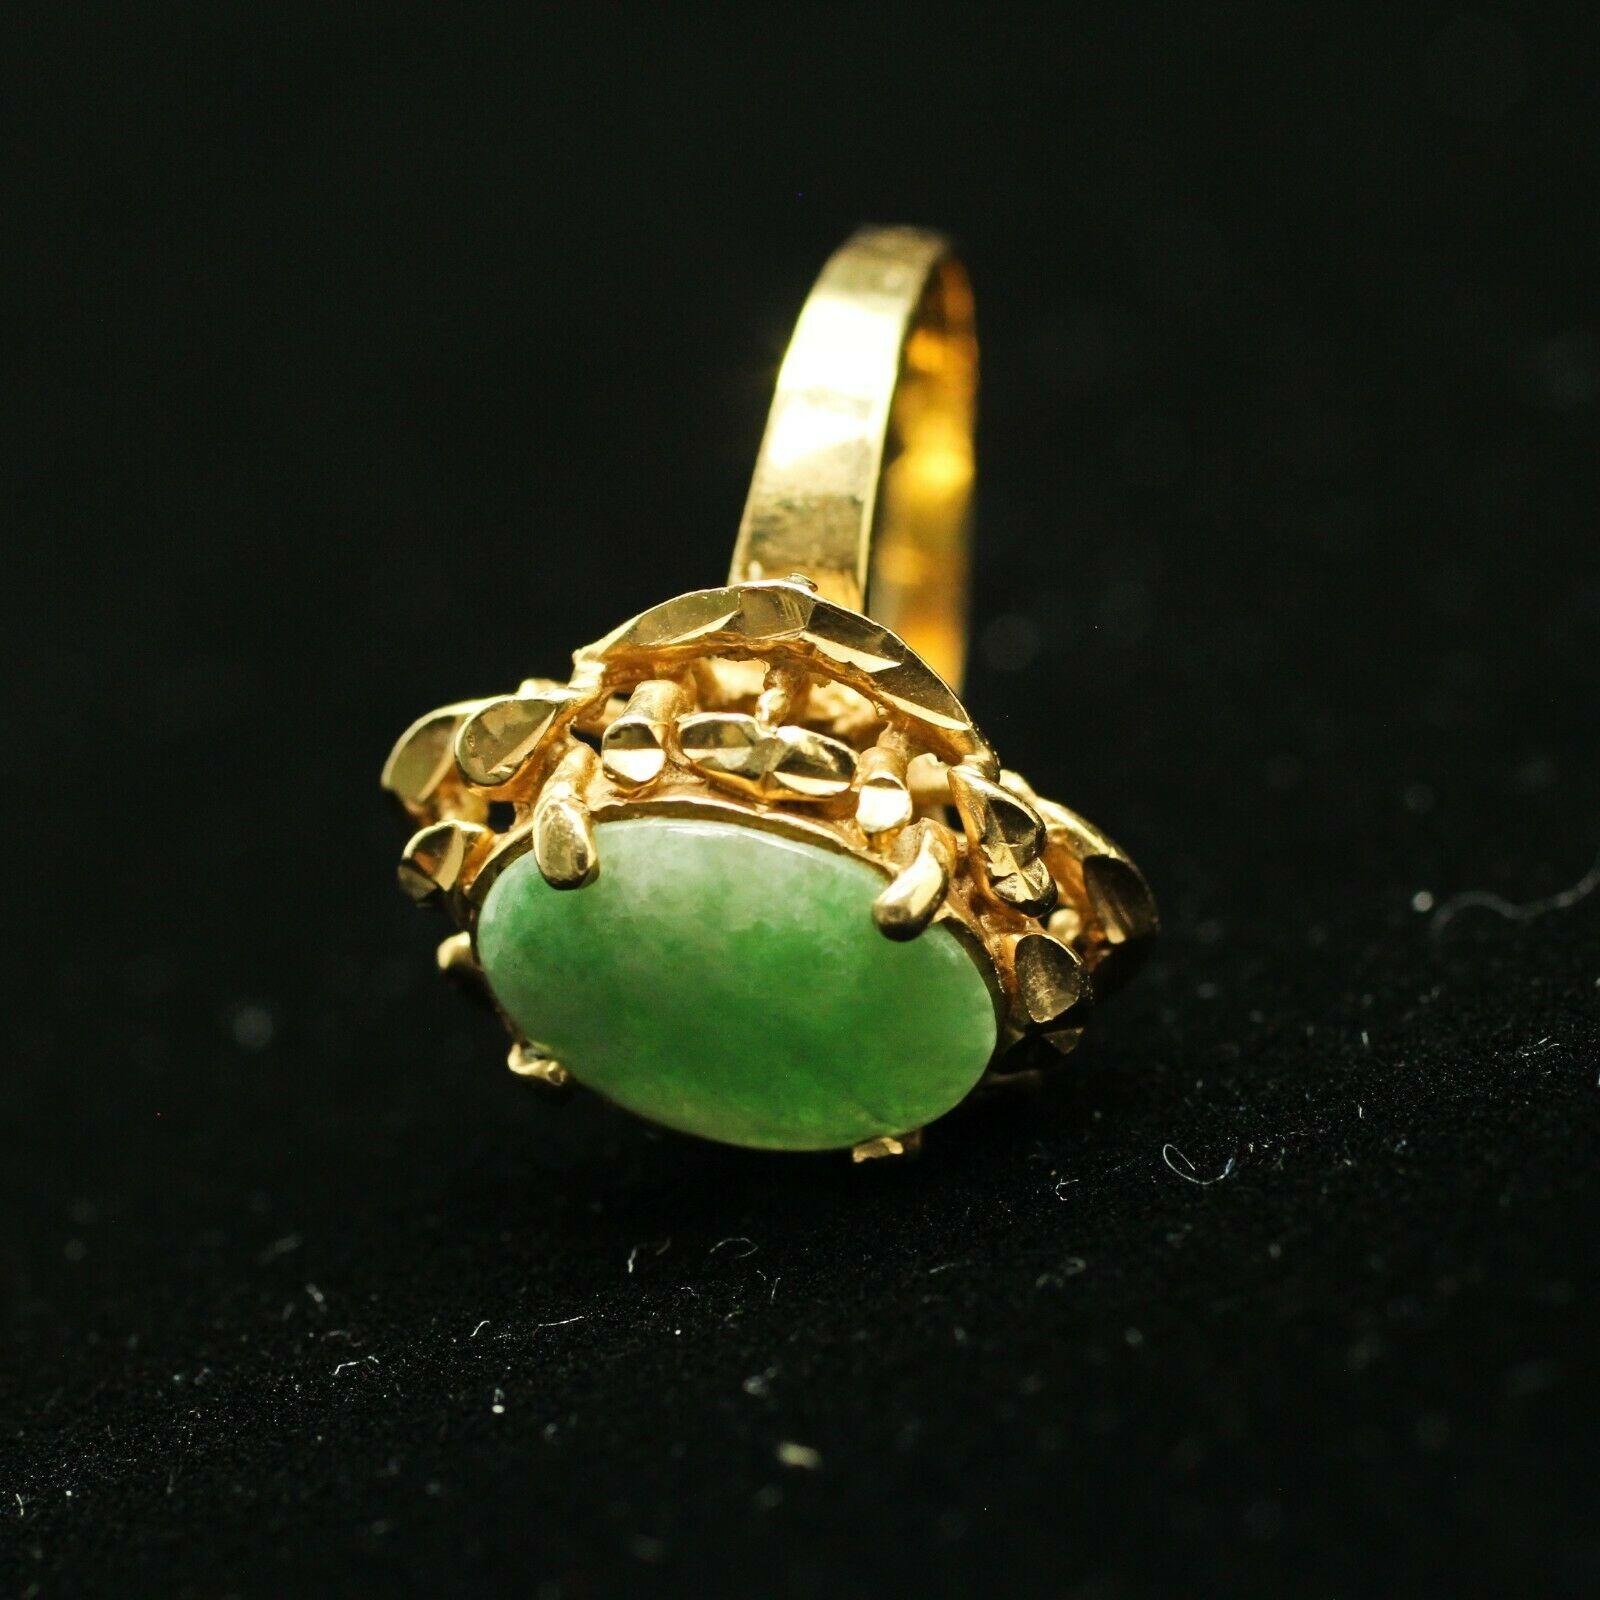  Specifications:
    STONE: GREEN OVAL JADE STONE 11.9MM-8.7MM 
    type: VINTAGE STYLE
    metal: 18K YELLOW GOLD
    SIZE: 5.75
    WIDTH/THICK: 15.2MM-8.4MM
    WEIGHT: 4.3GRS
